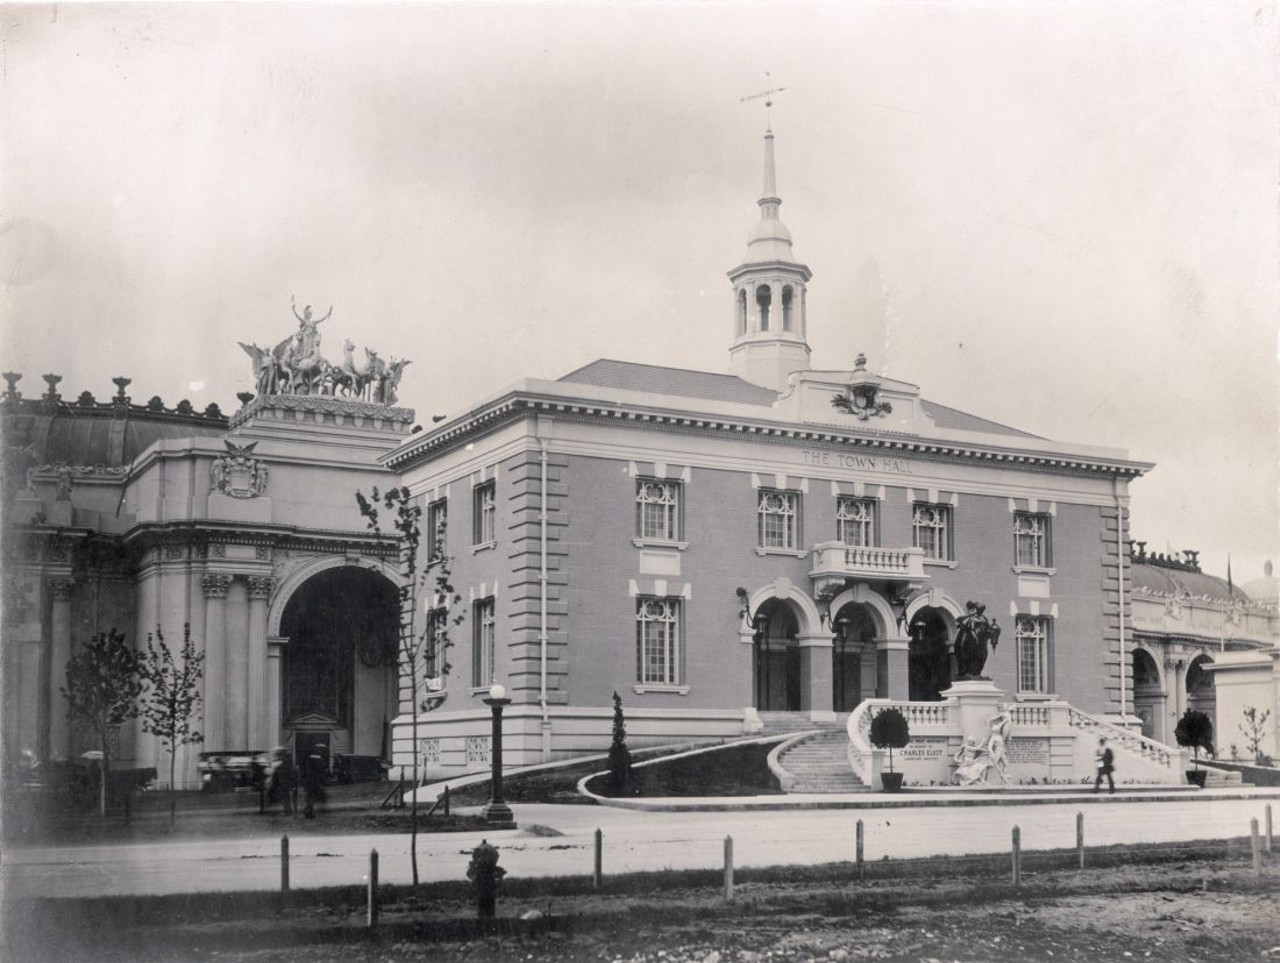 1904 WORLD'S FAIR TOWN HALL. Horizontal, black and white image showing the Town Hall, with the Civic Pride Monument between staircases, in the Model City area. Photo probably by Jessie Tarbox Beals. The Palace of Education is in the background.
Find out more about this photo at MoHistory.org.